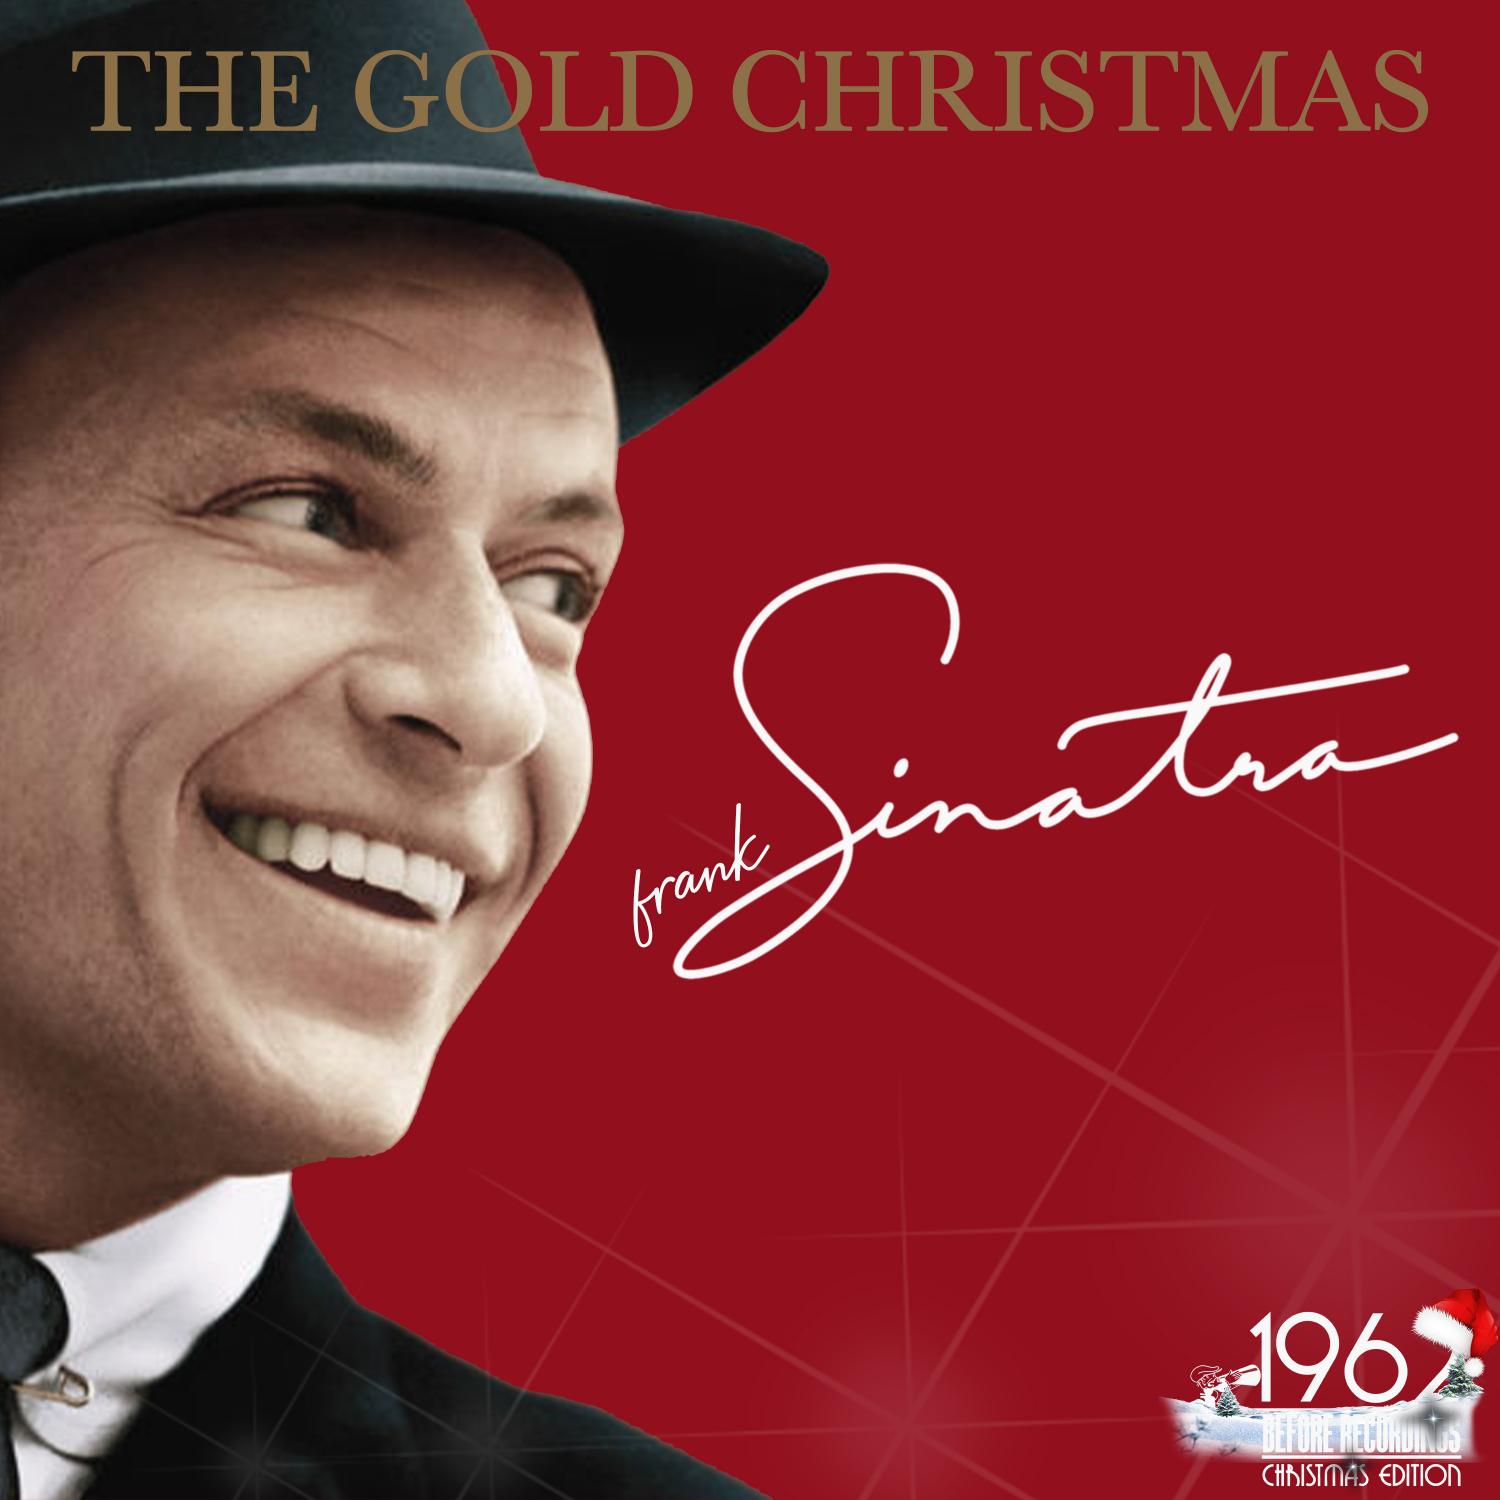 Santa Claus Is Coming to Town歌词 歌手Frank Sinatra-专辑The Gold Christmas-单曲《Santa Claus Is Coming to Town》LRC歌词下载